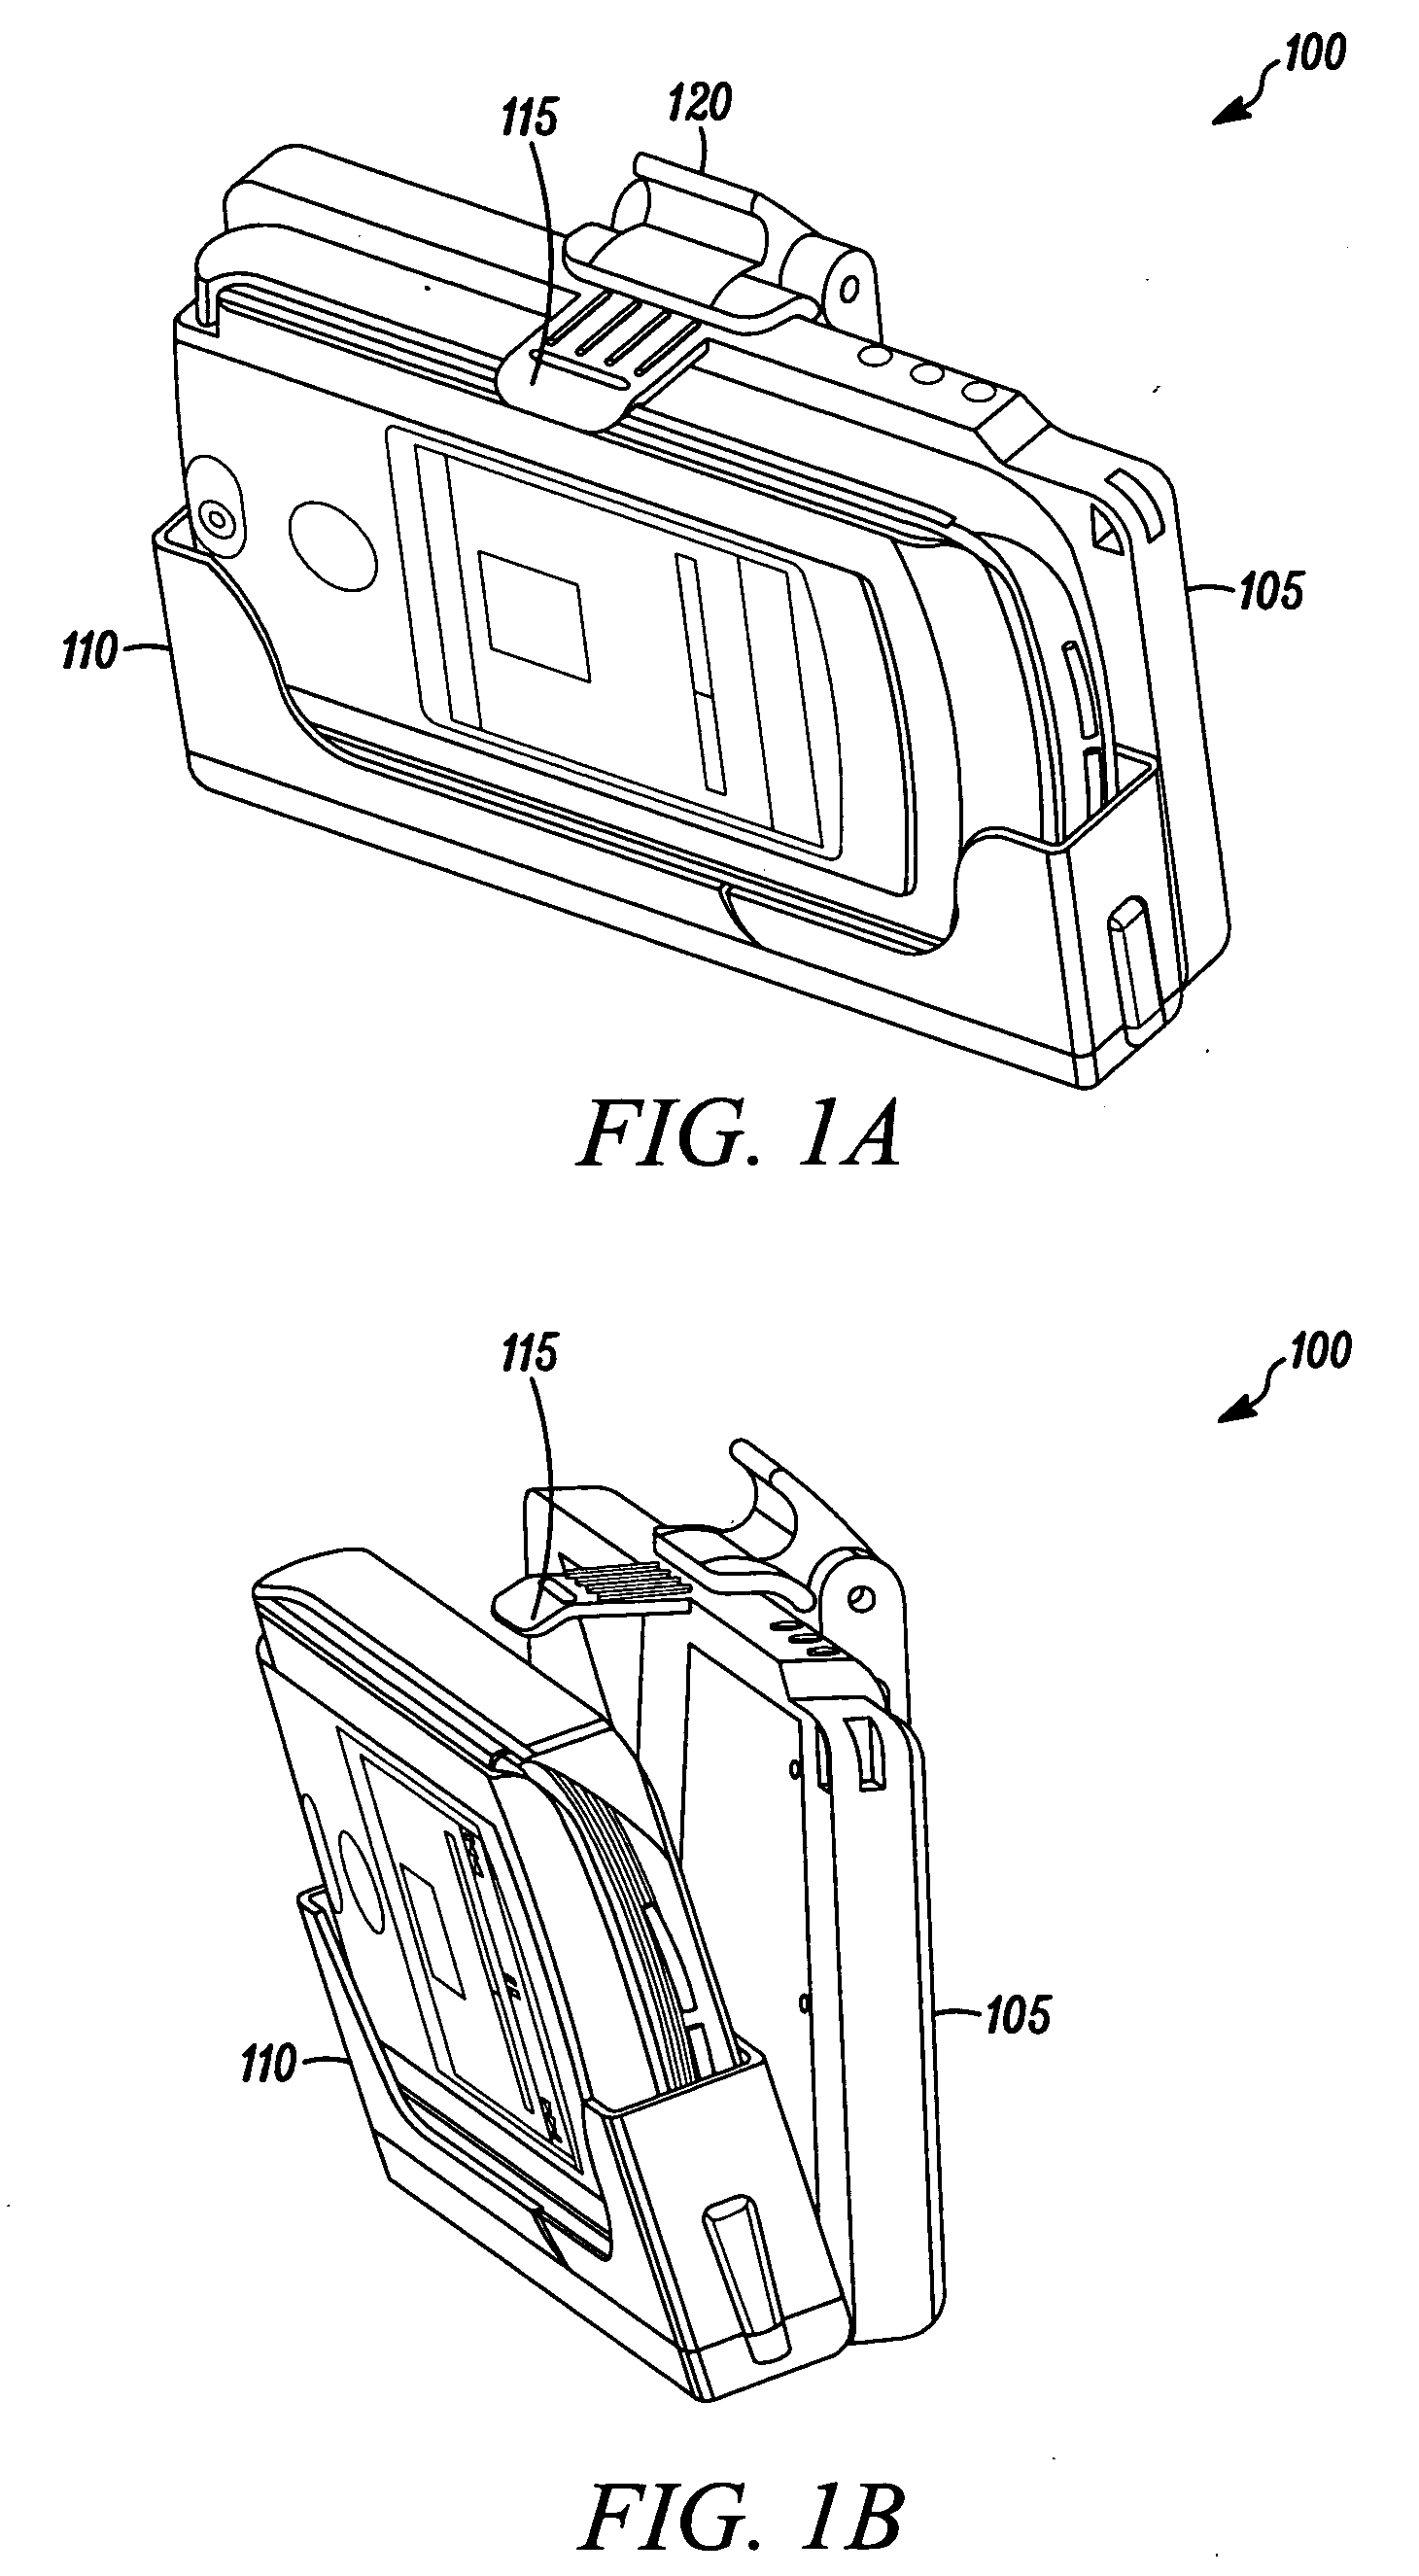 Portable and universal hybrid-charging apparatus for portable electronic devices